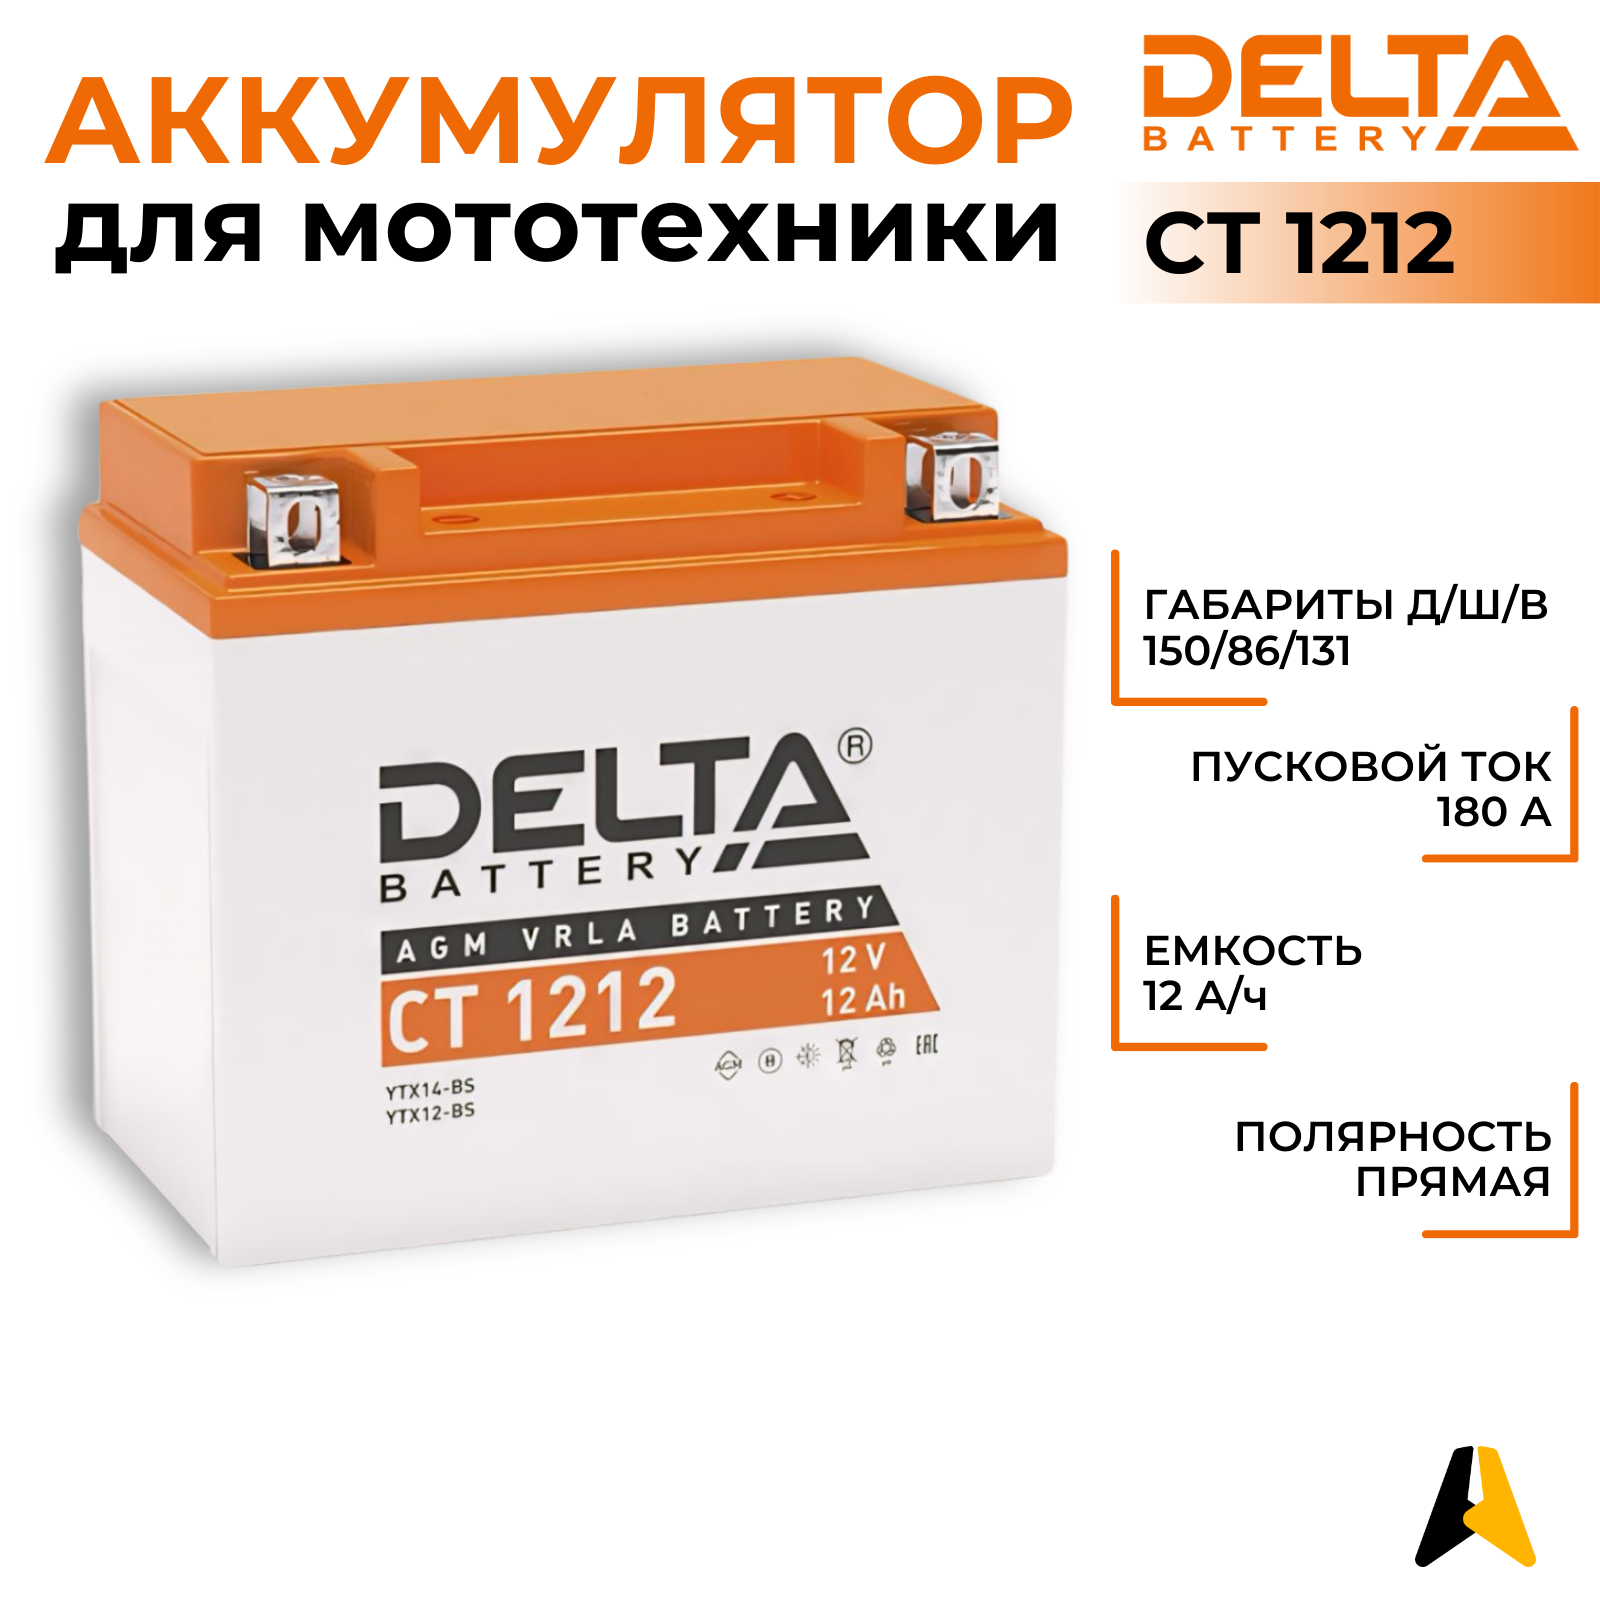 Мото аккумулятор DELTA Battery CT 1212 (YTX14-BS / YTX12-BS)